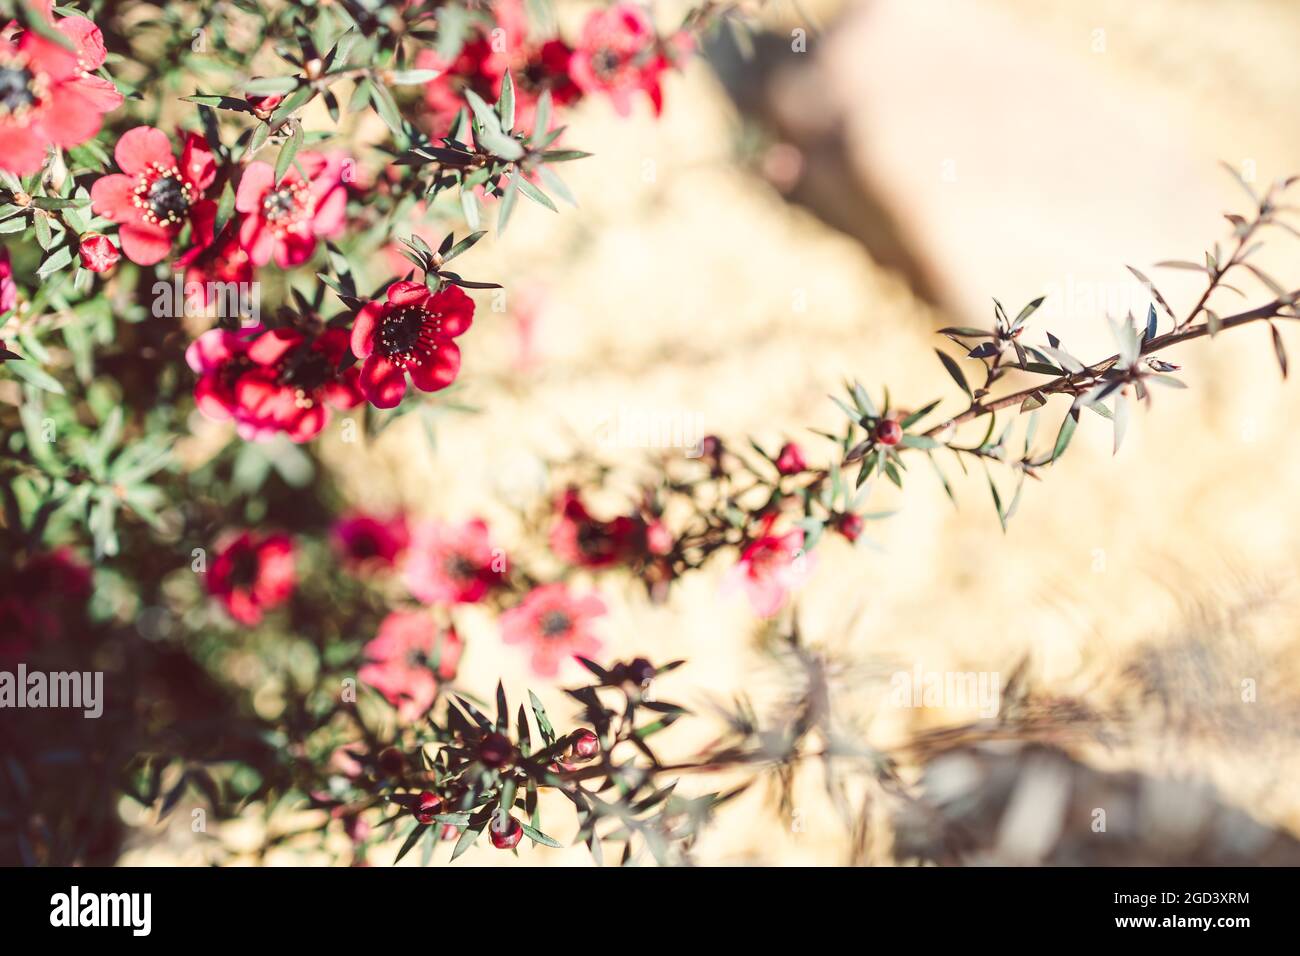 close-up of New Zealand Tea Bush plant with dark leaves and red flowers shot at shallow depth of fielld Stock Photo